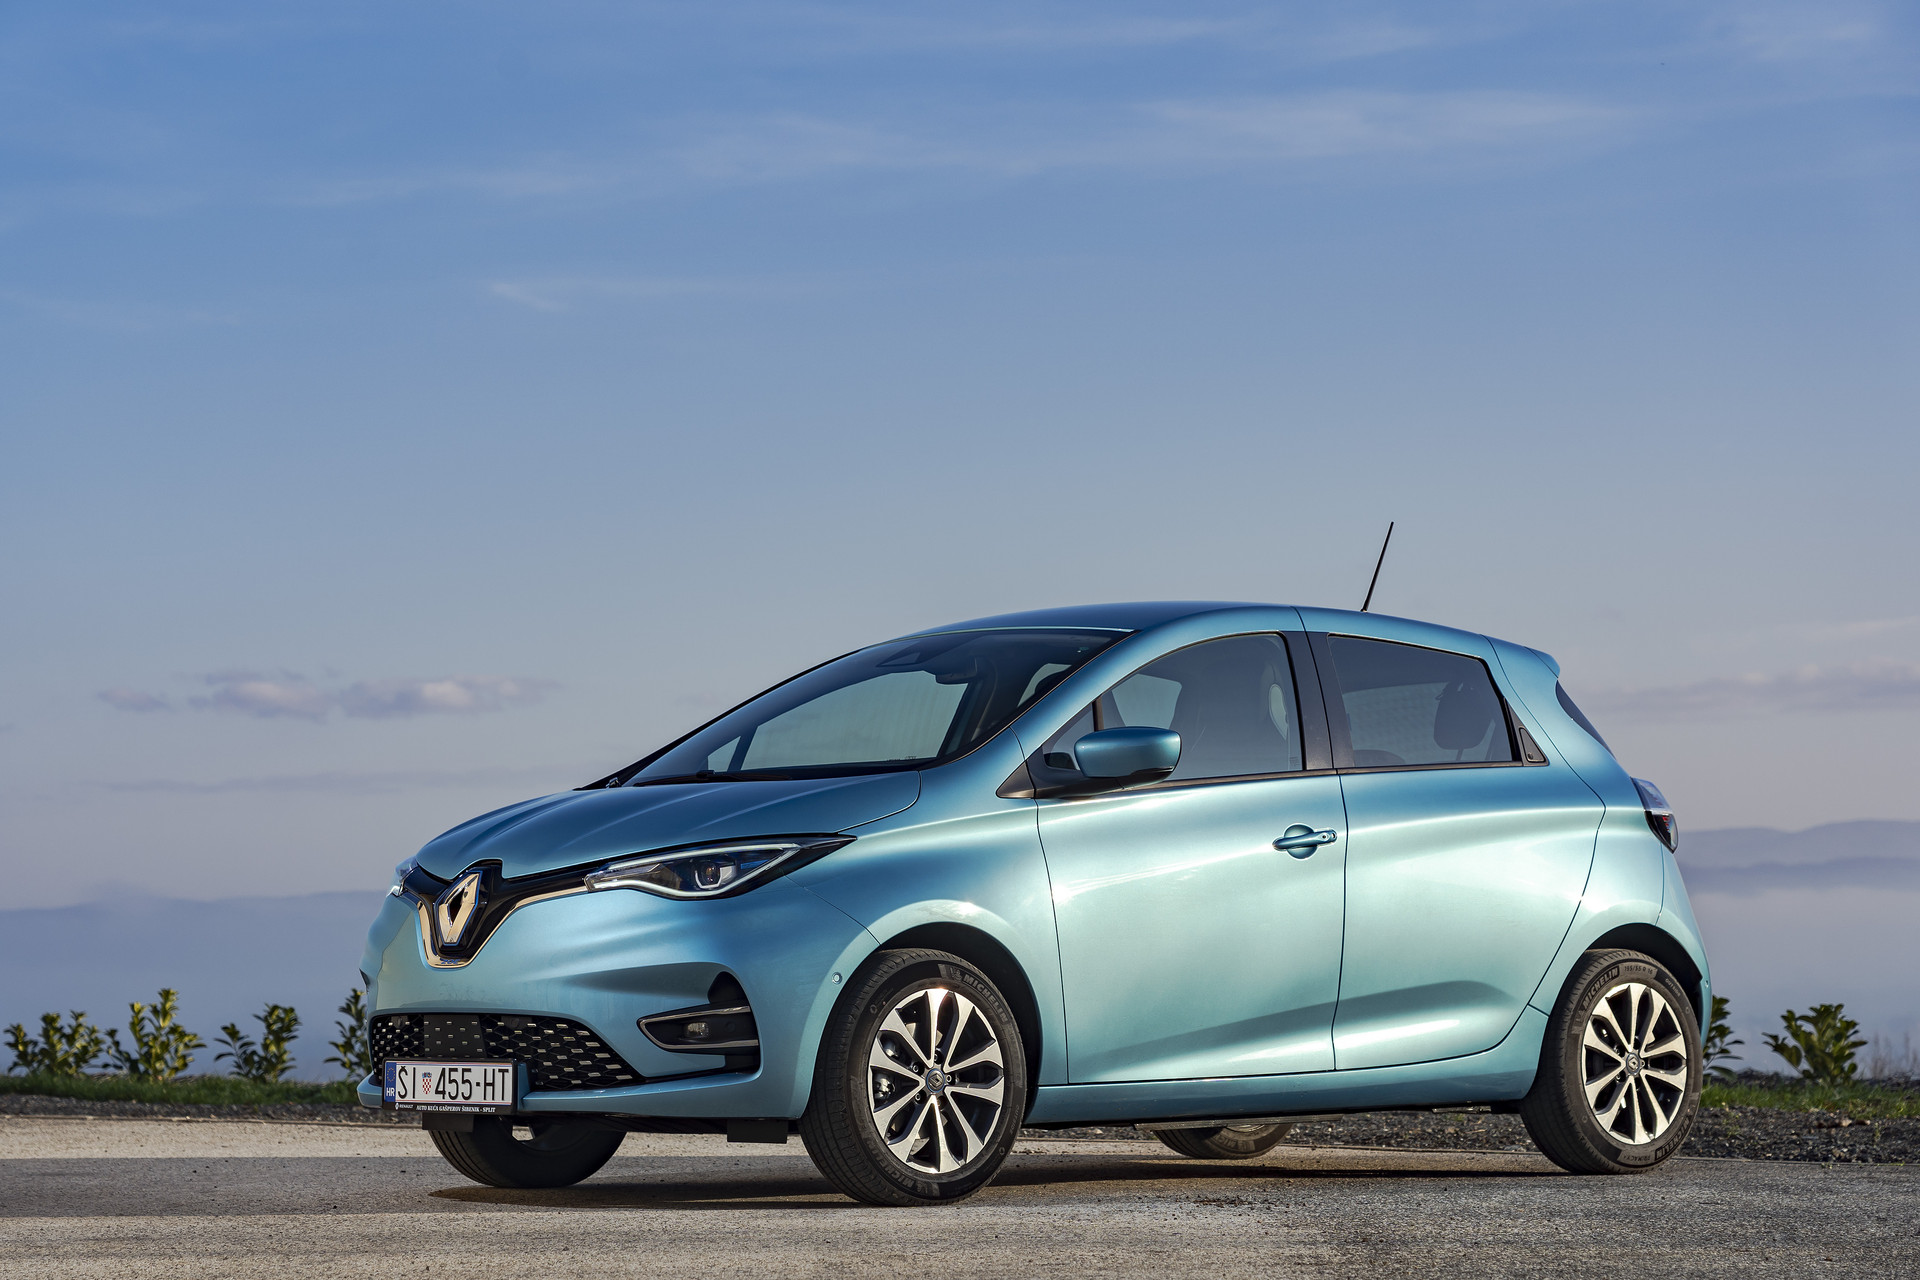 The Renault Zoe was also found to be a poor performer